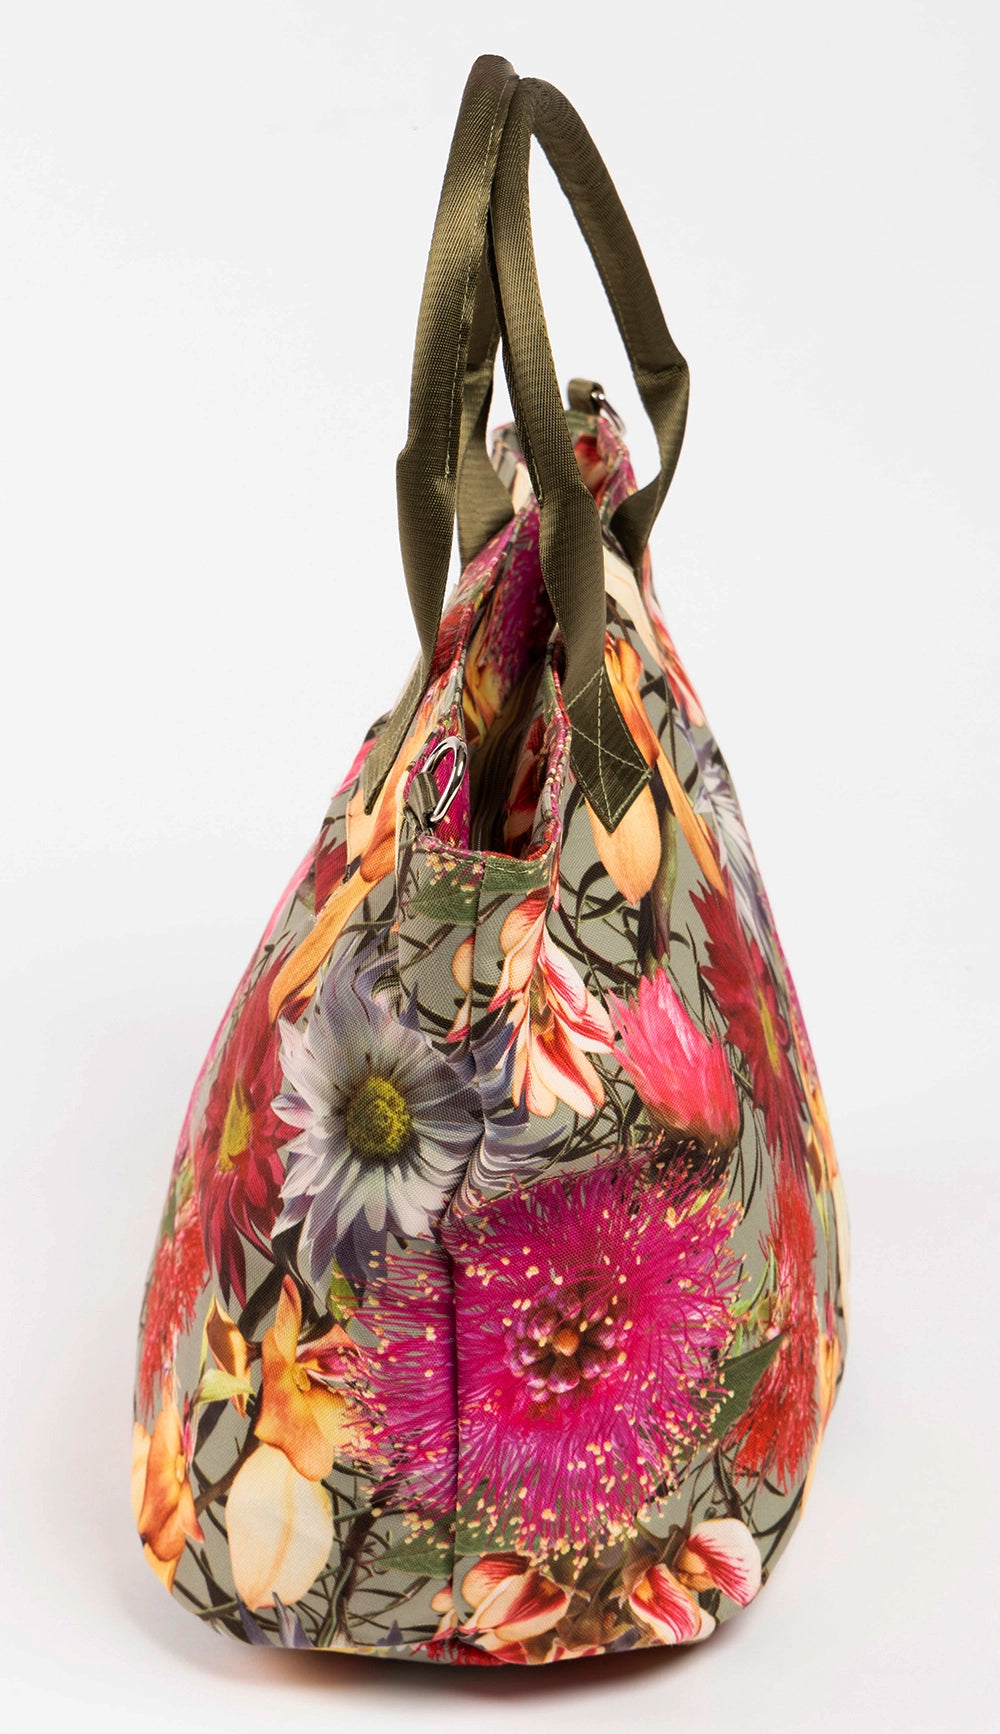 A large, bright floral canvas tote bag from Wild Things Lifestyle.